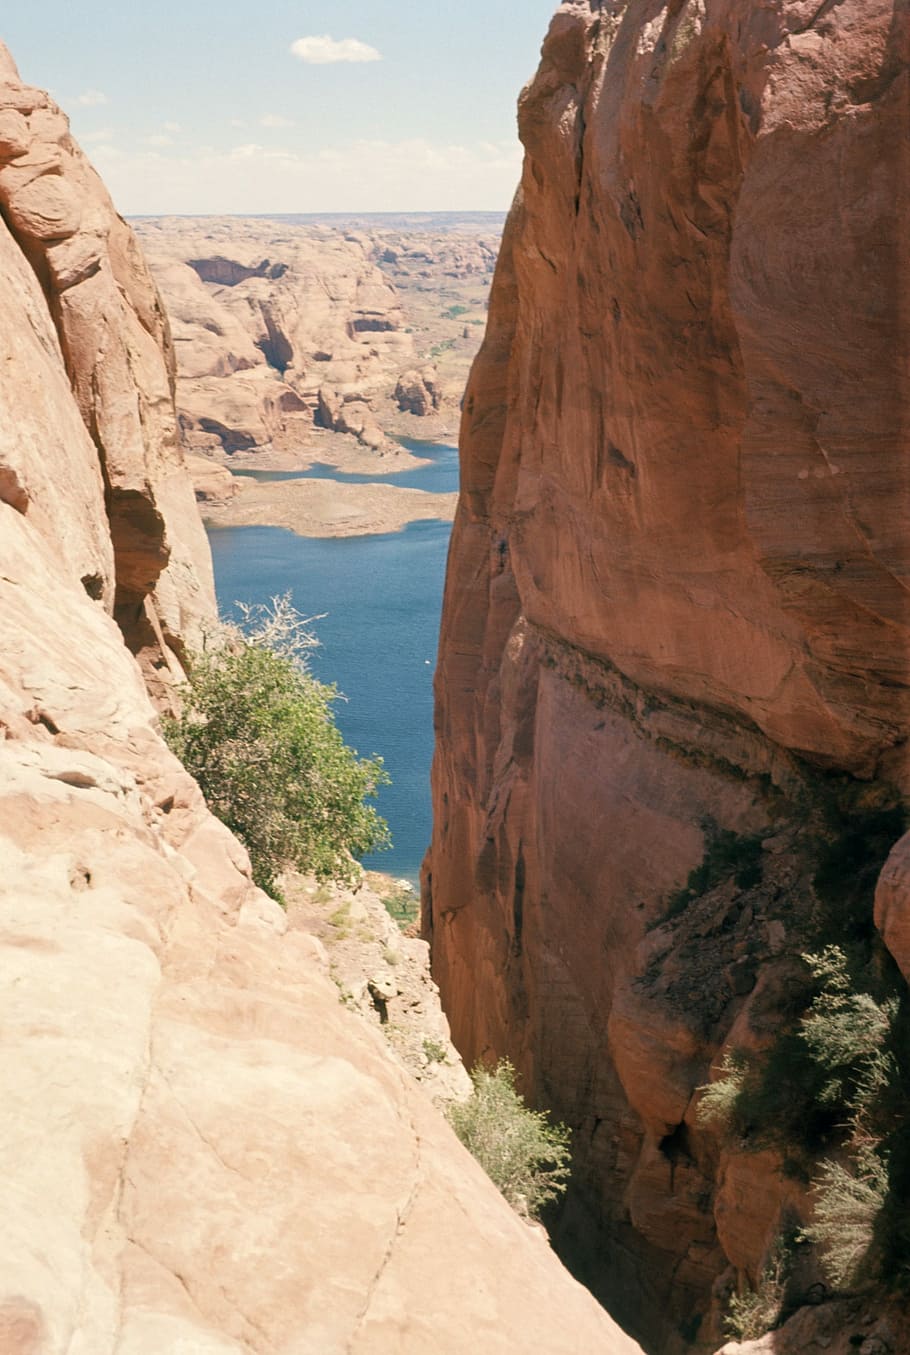 utah, lake powell, hole-in-the-rock, pioneer, rock, rock formation, rock - object, solid, scenics - nature, beauty in nature